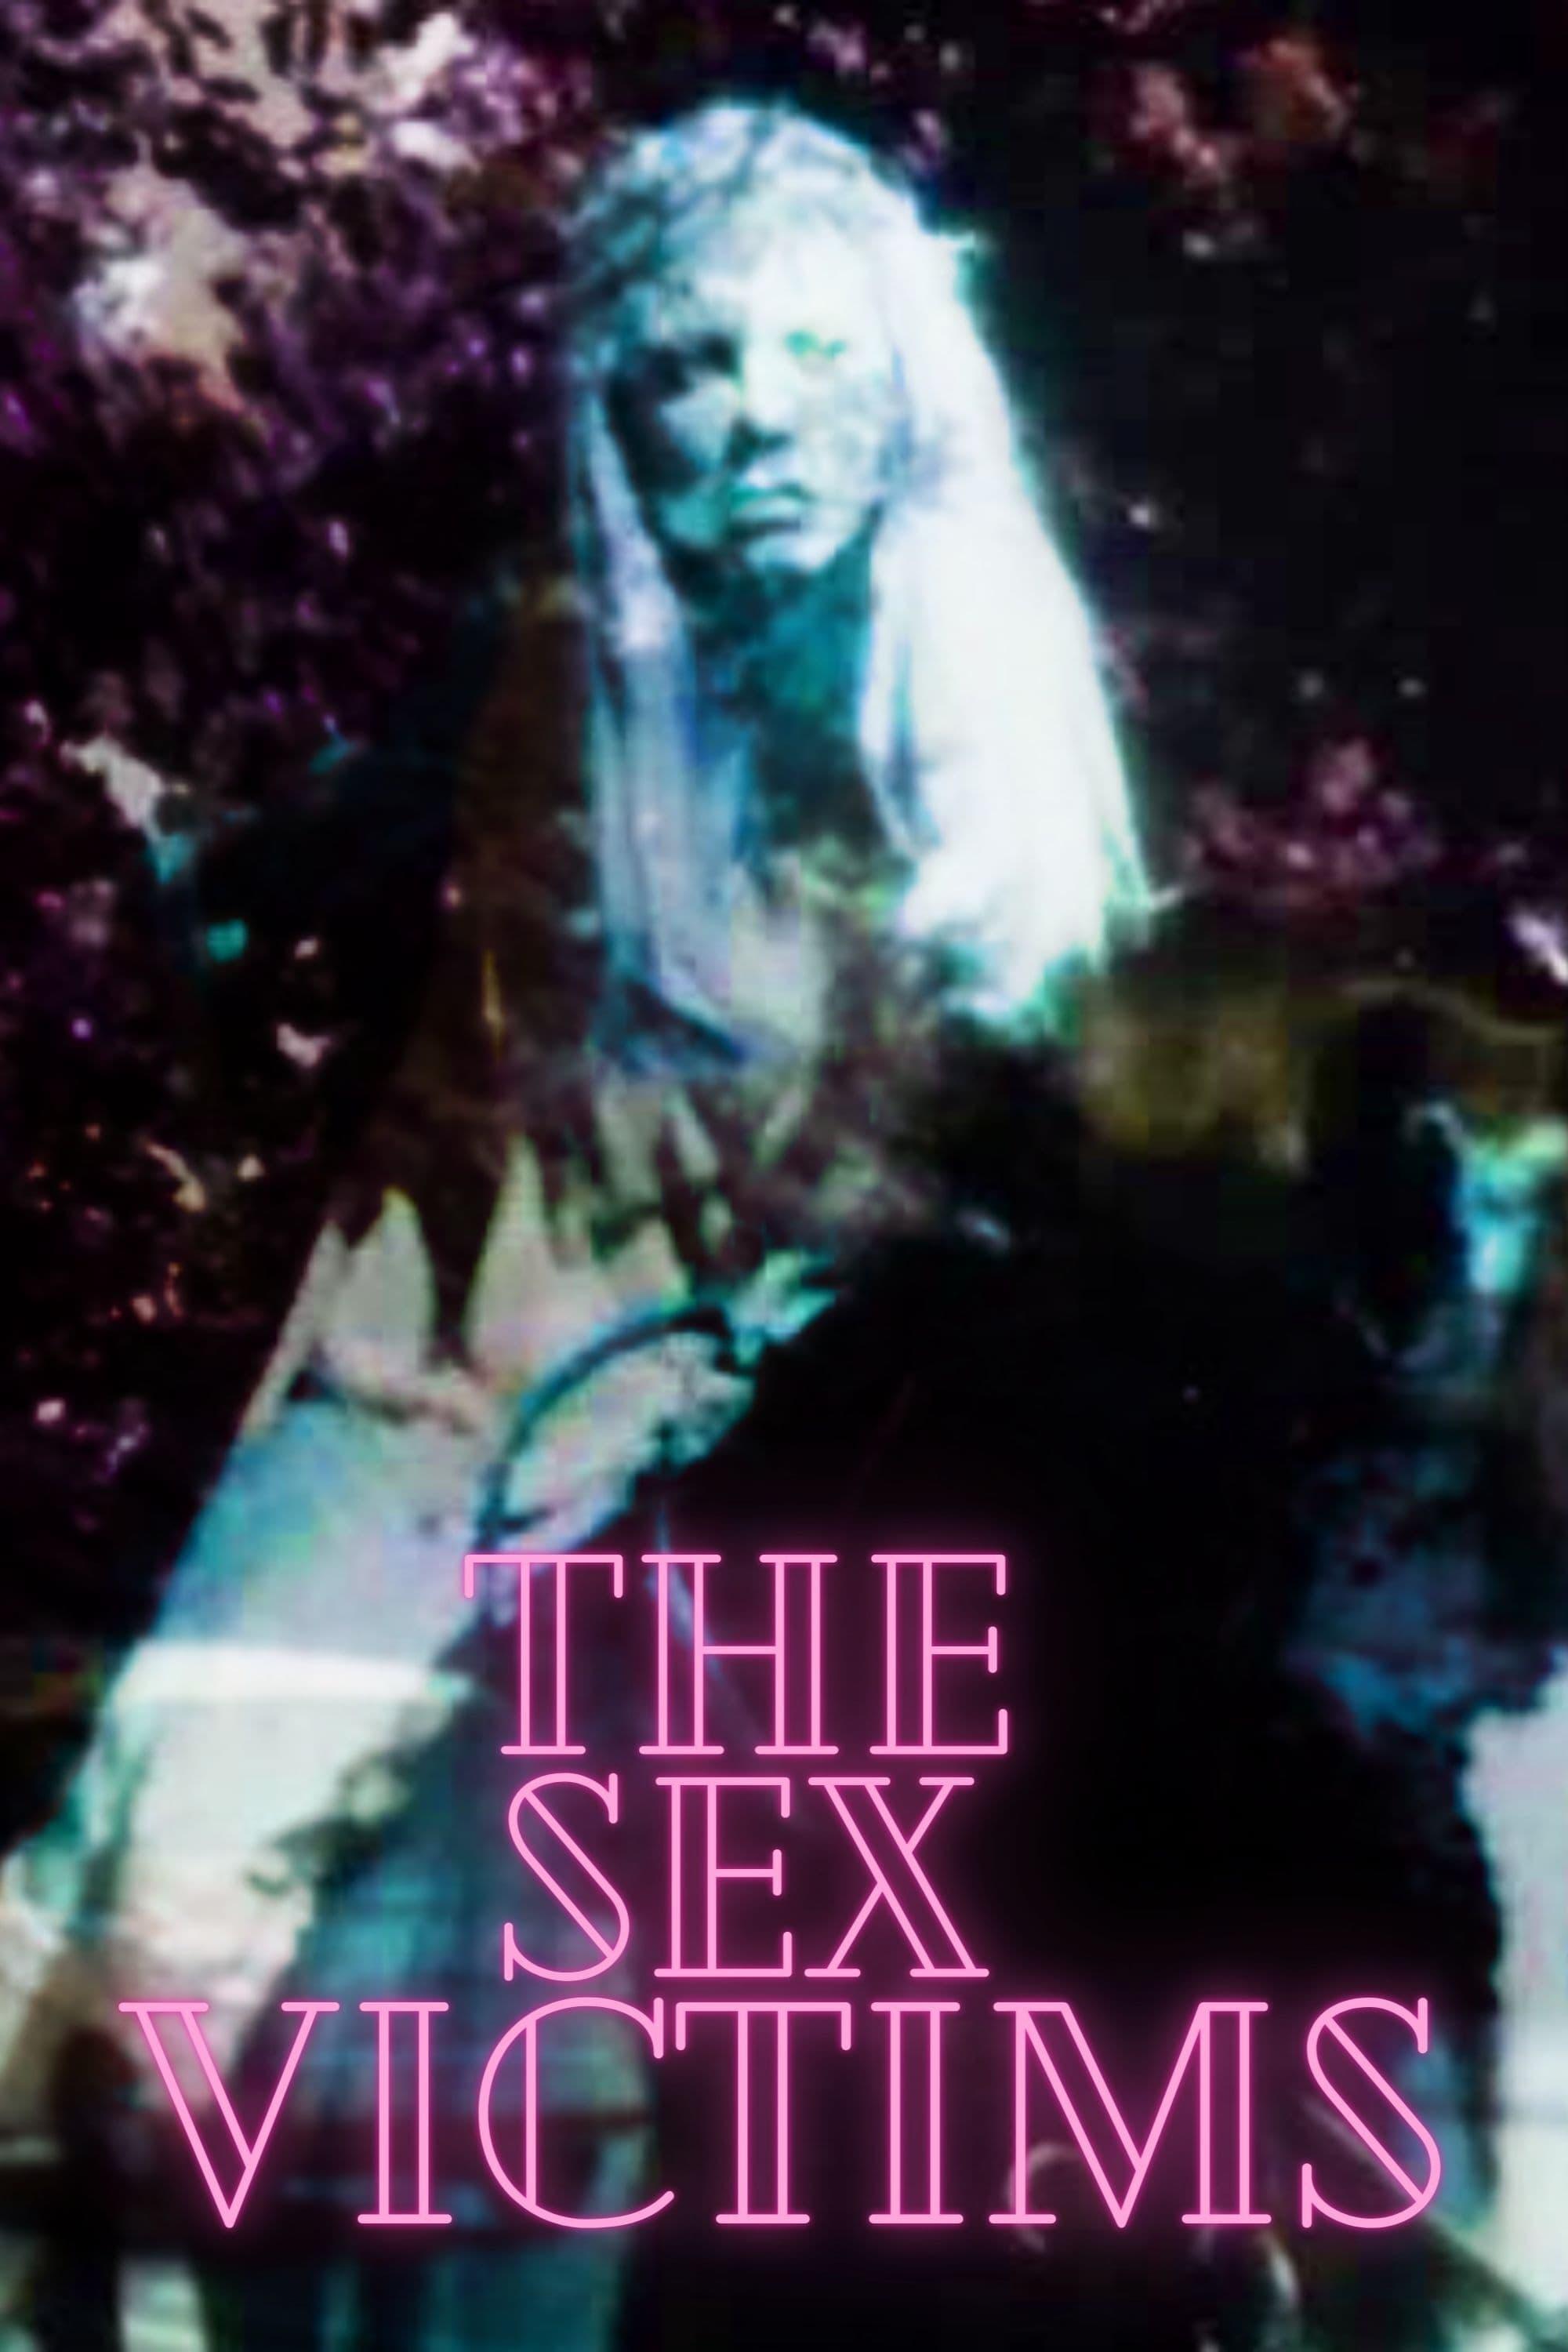 The Sex Victims poster